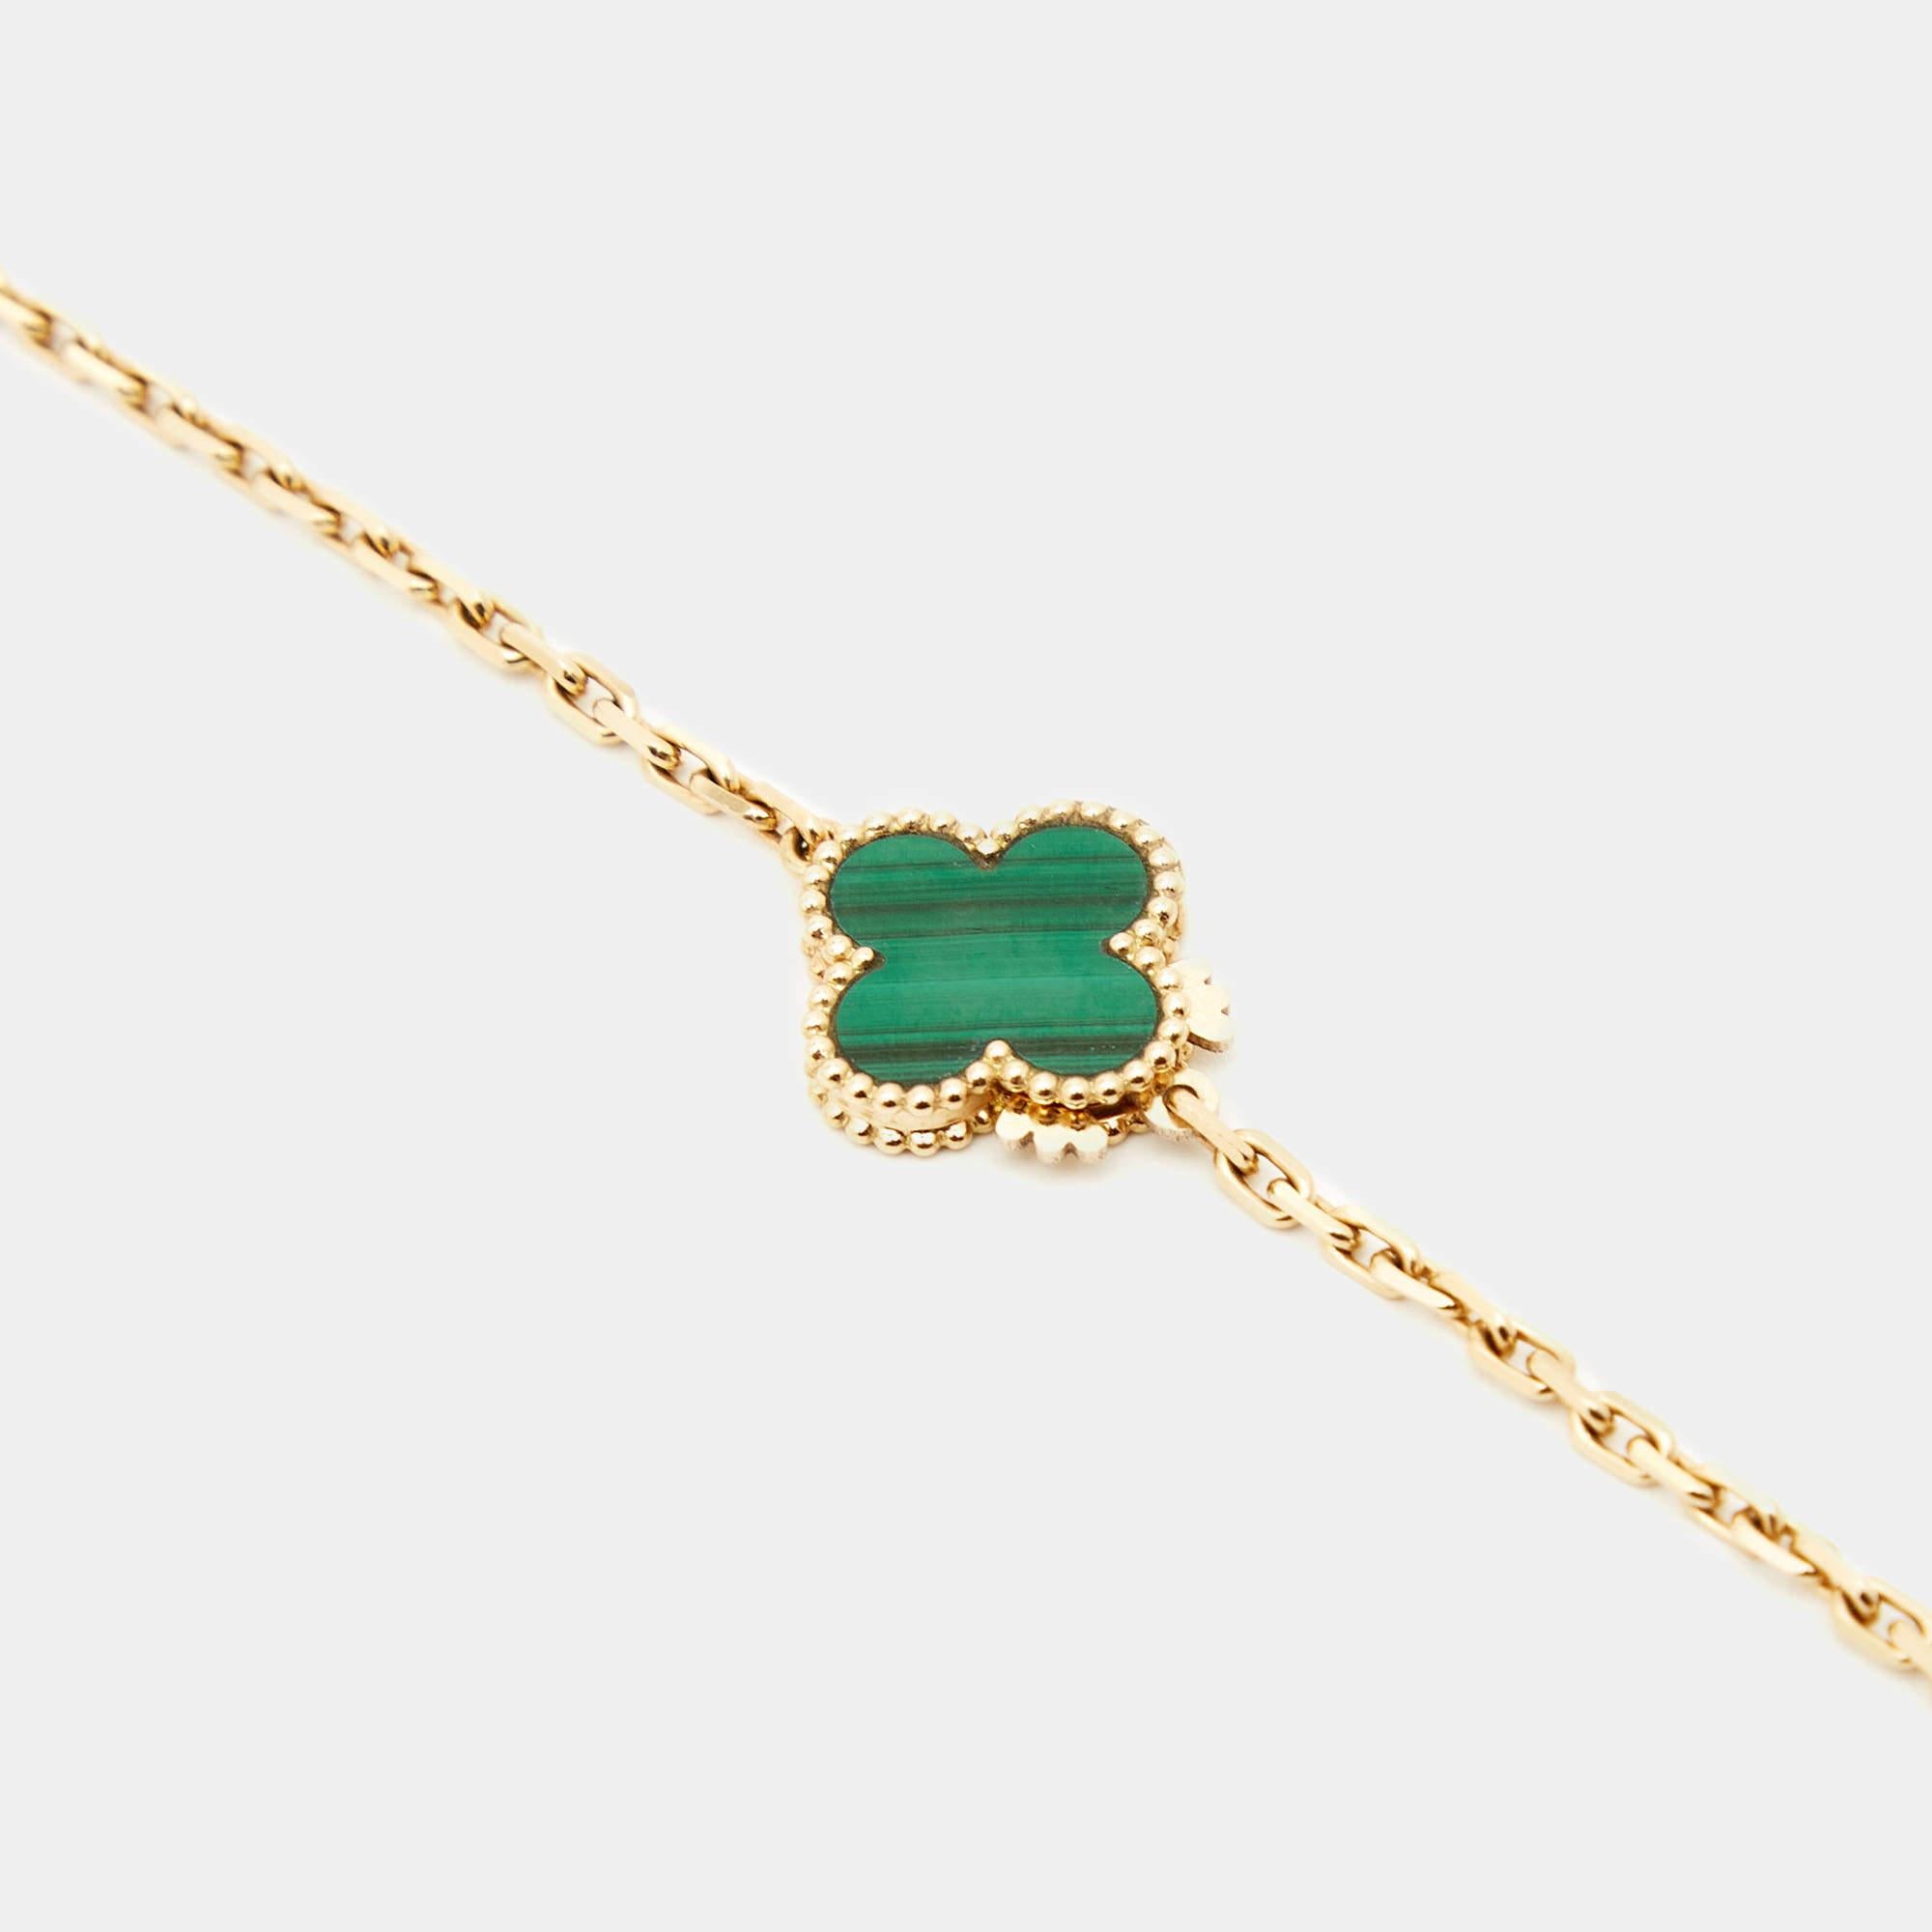 The Van Cleef & Arpels Magic Alhambra necklace is a stunning piece crafted in 18k yellow gold. Featuring the iconic Alhambra motifs with malachite inlays, the long necklace exudes elegance and sophistication, making it a timeless statement accessory